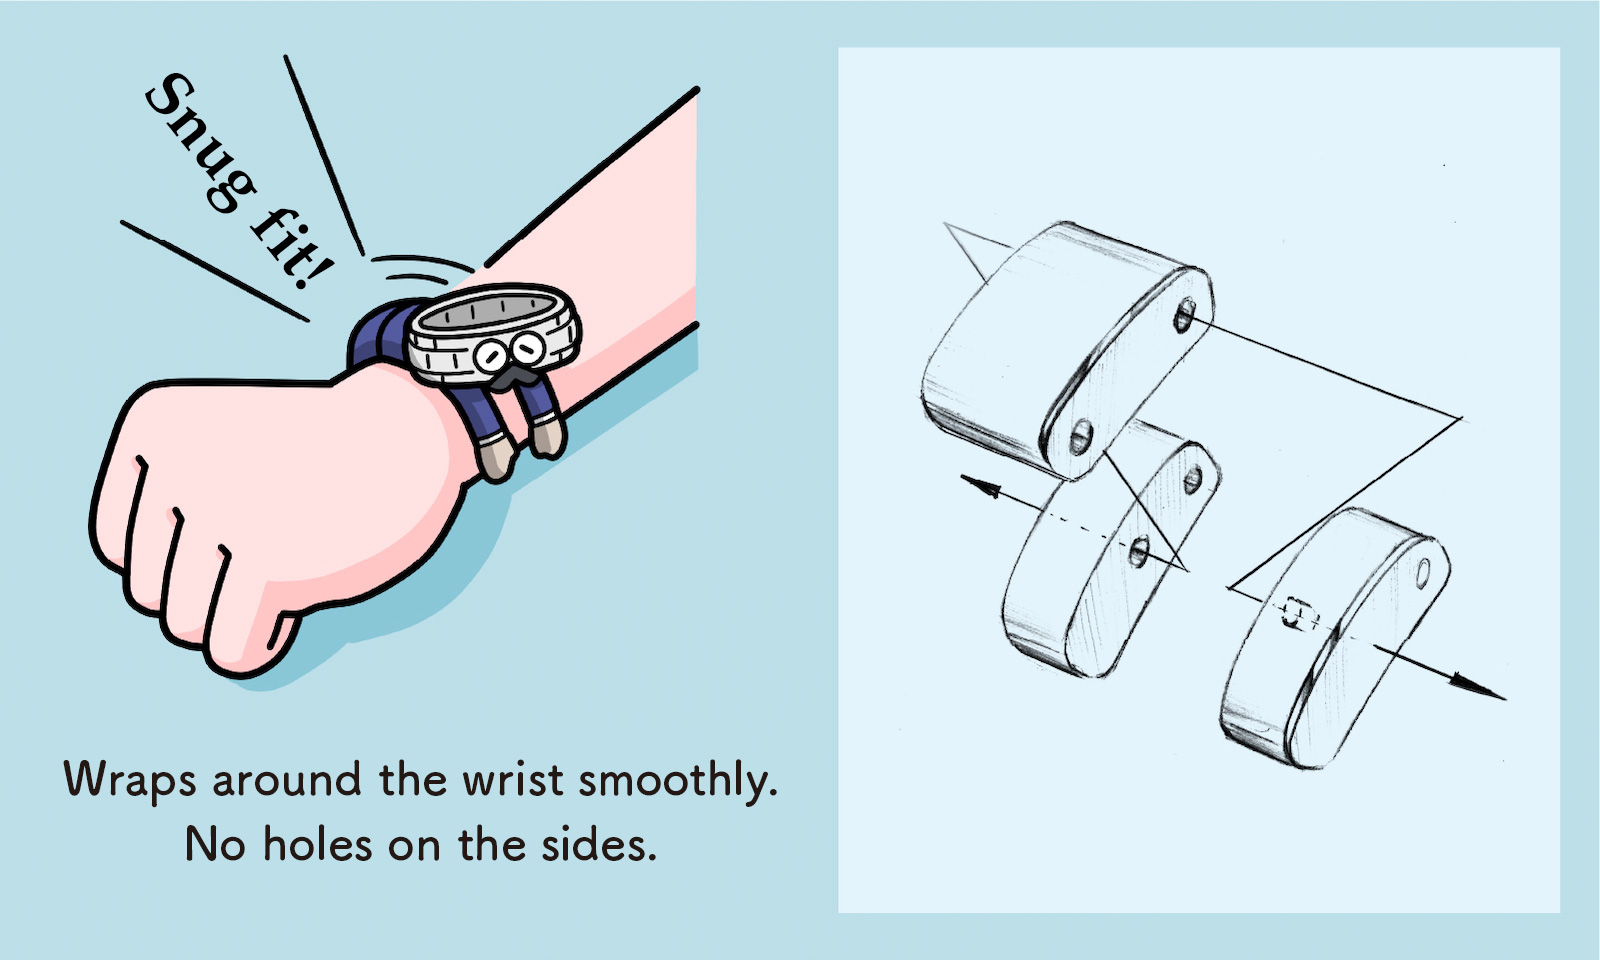 Wraps around the wrist smoothly. No holes on the sides. (Illustration of the structure of links)